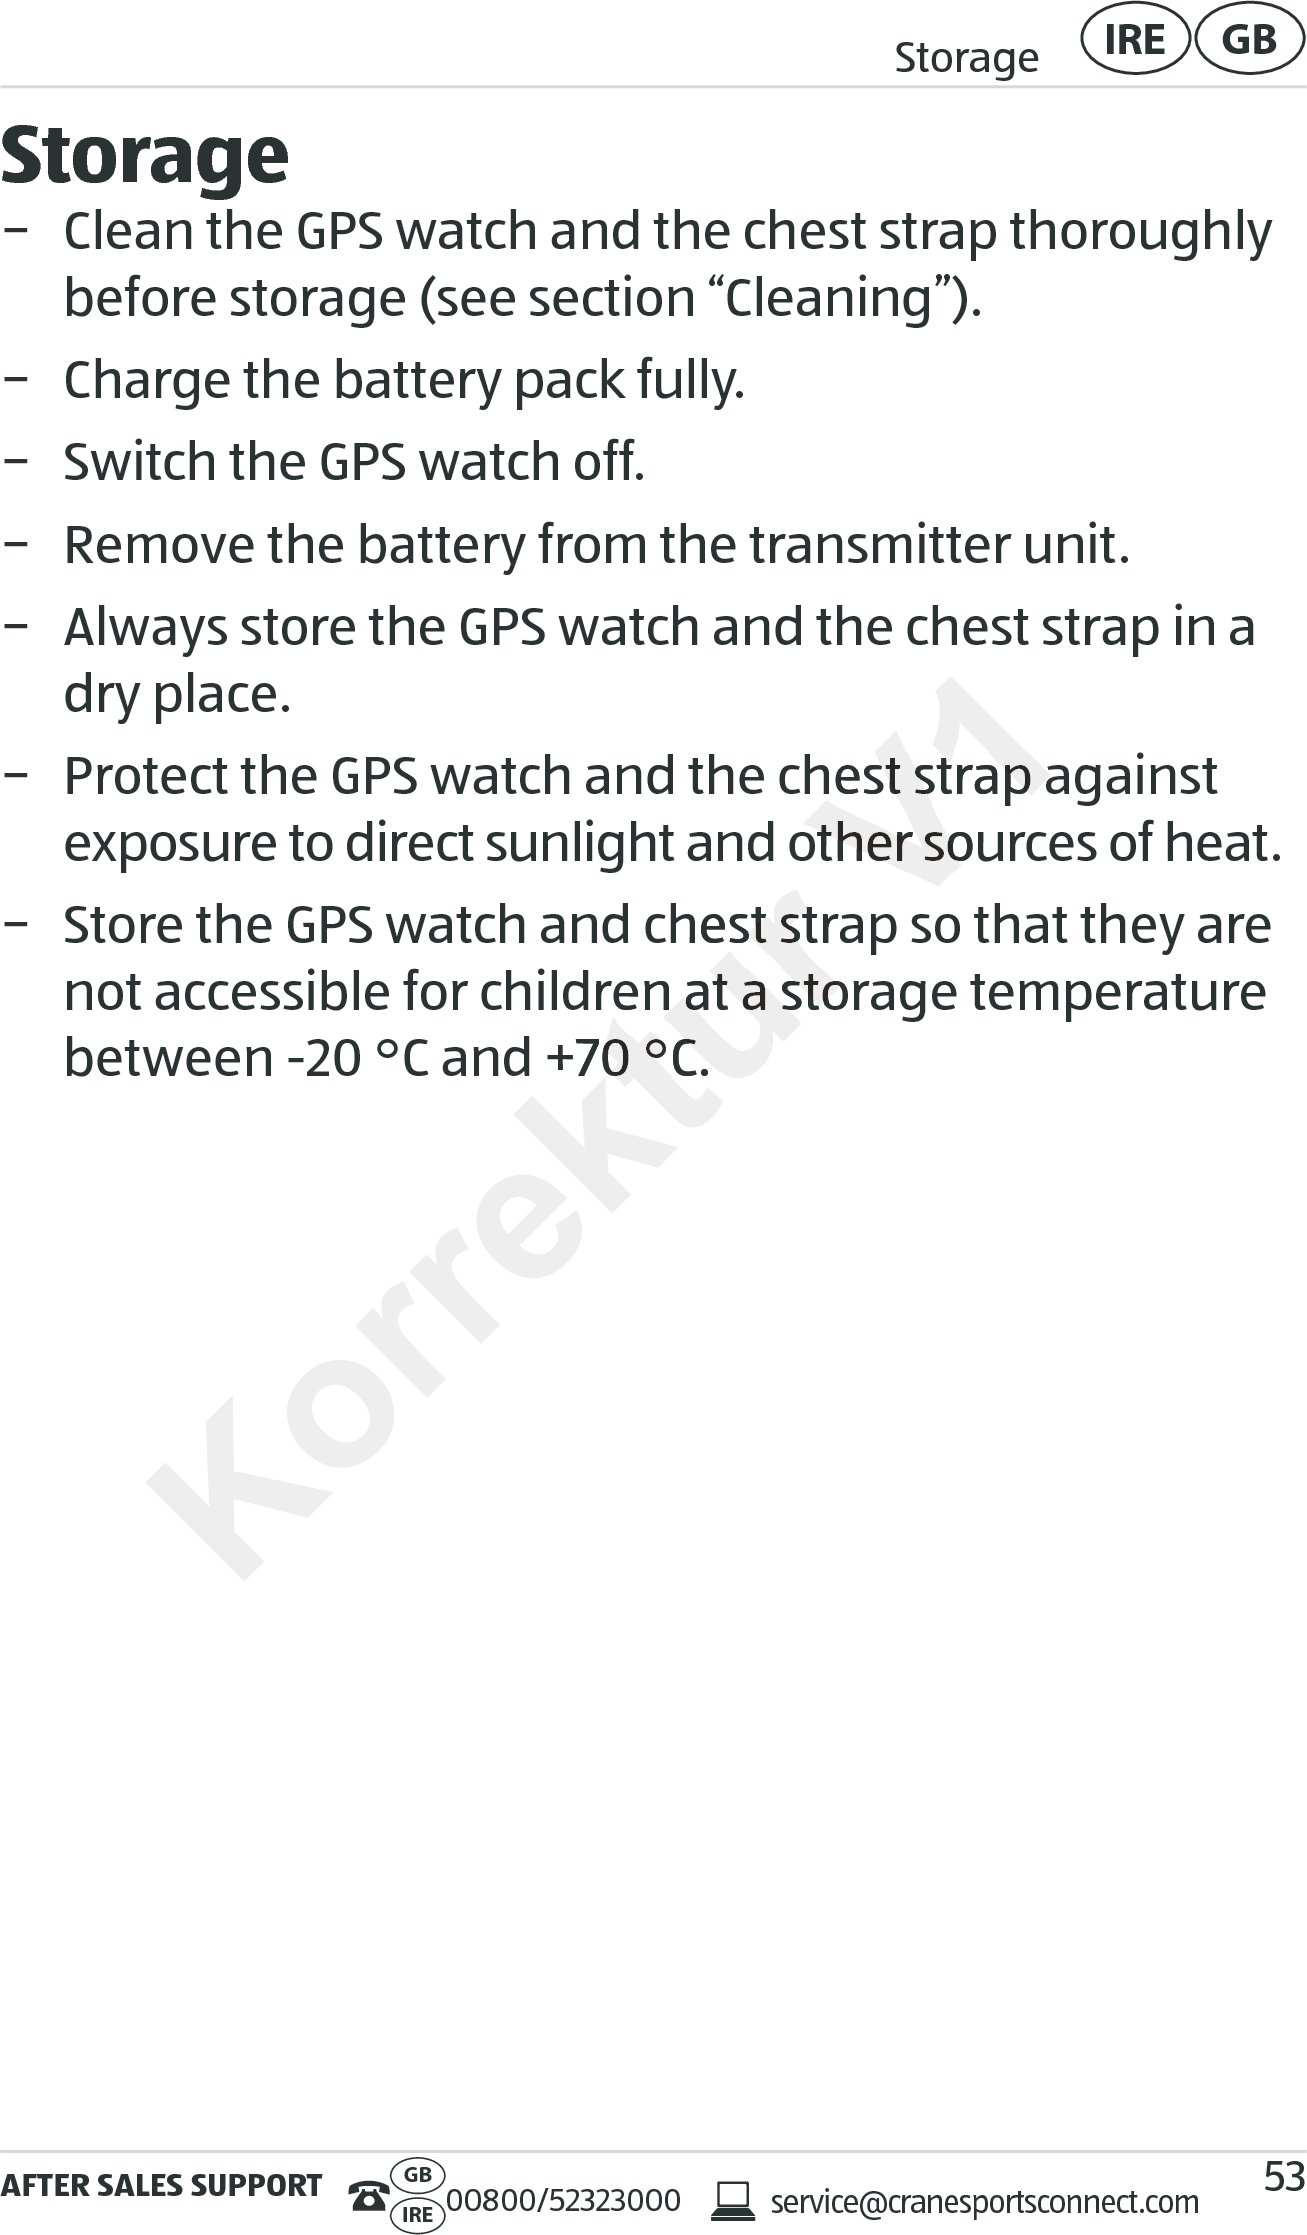 AFTER SALES SUPPORTservice@cranesportsconnect.comGBIRE 00800/52323000Storage GBIRE53Storage − Clean the GPS watch and the chest strap thoroughly before storage (see section “Cleaning”). − Charge the battery pack fully. − Switch the GPS watch off. − Remove the battery from the transmitter unit. − Always store the GPS watch and the chest strap in a dry place. − Protect the GPS watch and the chest strap against  exposure to direct sunlight and other sources of heat. − Store the GPS watch and chest strap so that they are not accessible for children at a storage temperature between -20°C and +70°C.Korrektur exposure to direct sunlight and other sources of heat.e the GPS watch and chest strap so that they are e the GPS watch and chest strap so that they are not accessible for children at a storage temperature not accessible for children at a storage temperature between -20°C and +70°C.between -20°C and +70°C.V1ect the GPS watch and the chest strap against  ect the GPS watch and the chest strap against  exposure to direct sunlight and other sources of heat.exposure to direct sunlight and other sources of heat.e the GPS watch and chest strap so that they are 